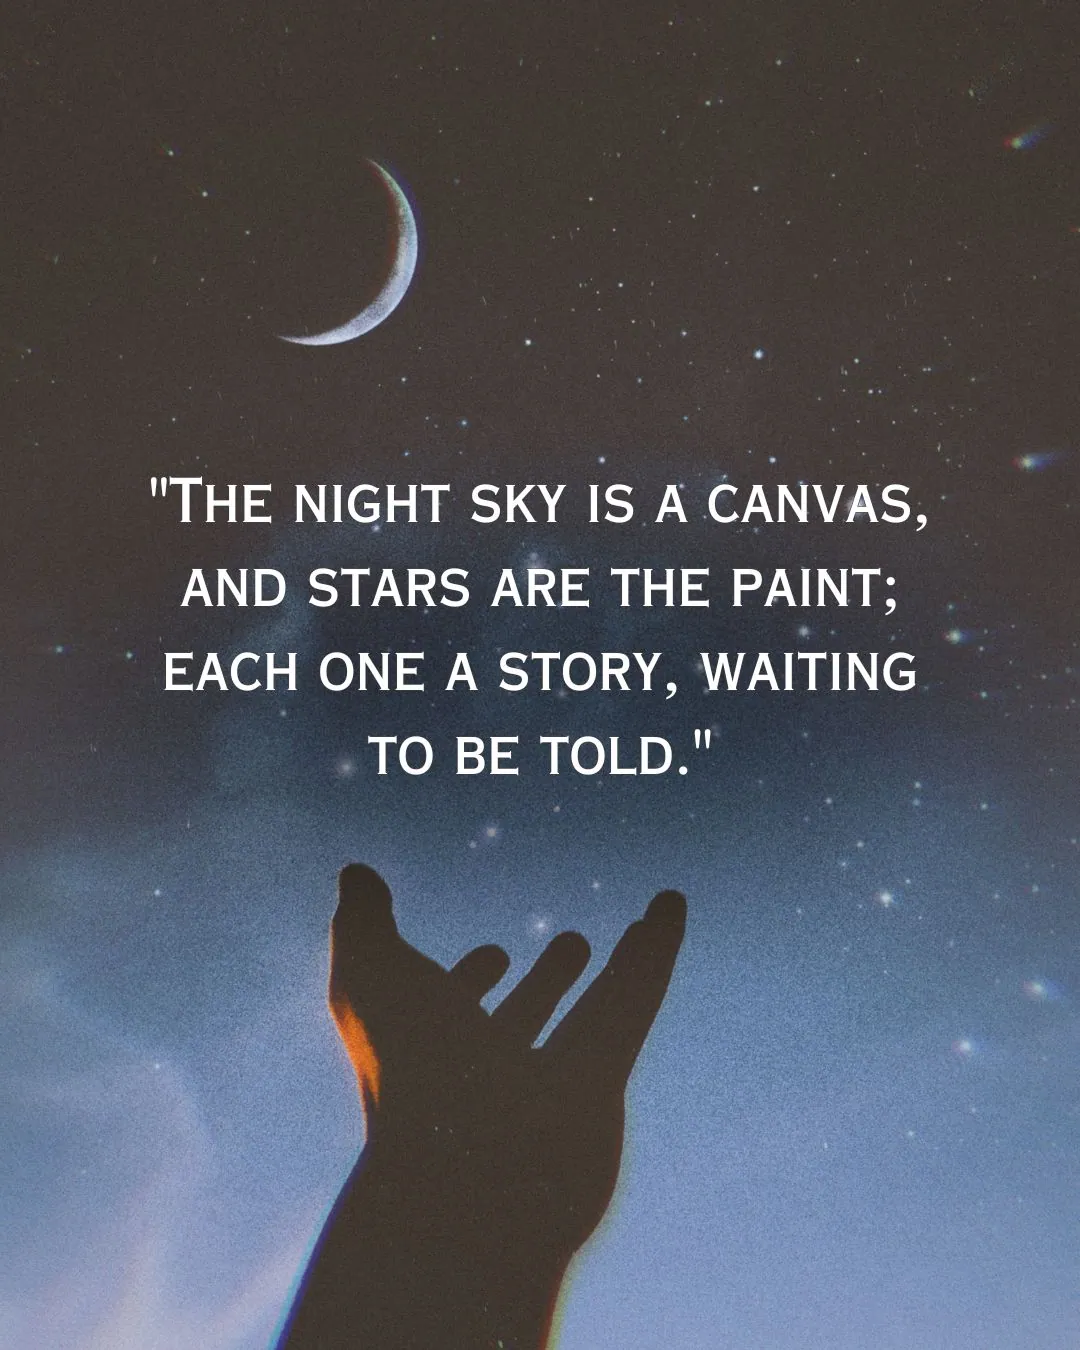 Meaningful Night Sky Quotes for Instagram Image (1)